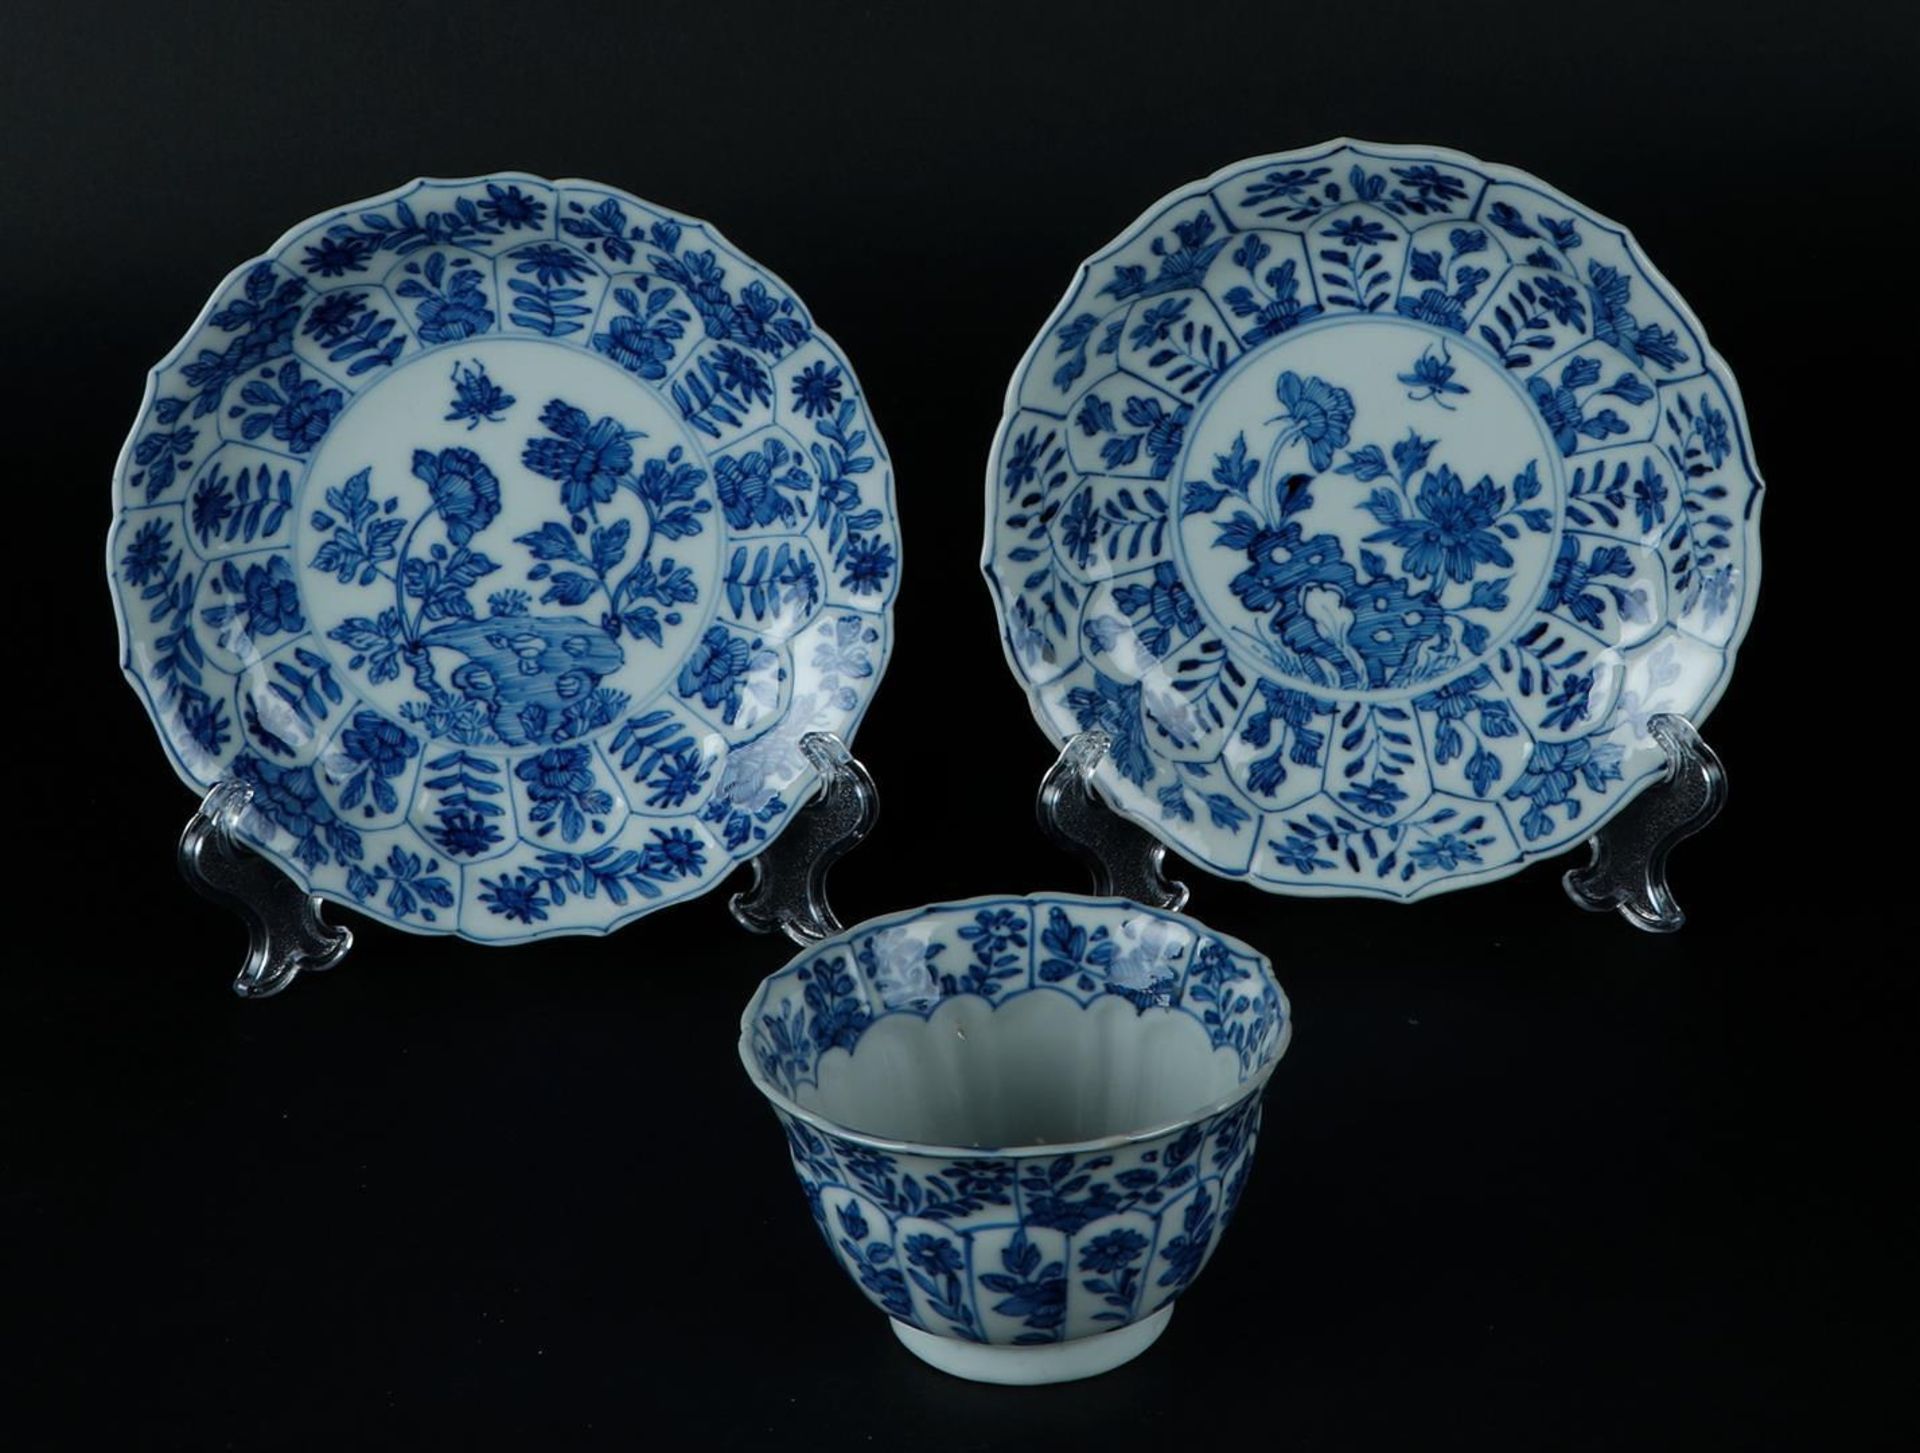 Two porcelain plates and bowl with lotus leaf shaped outer beds in relief with floral decor, center 